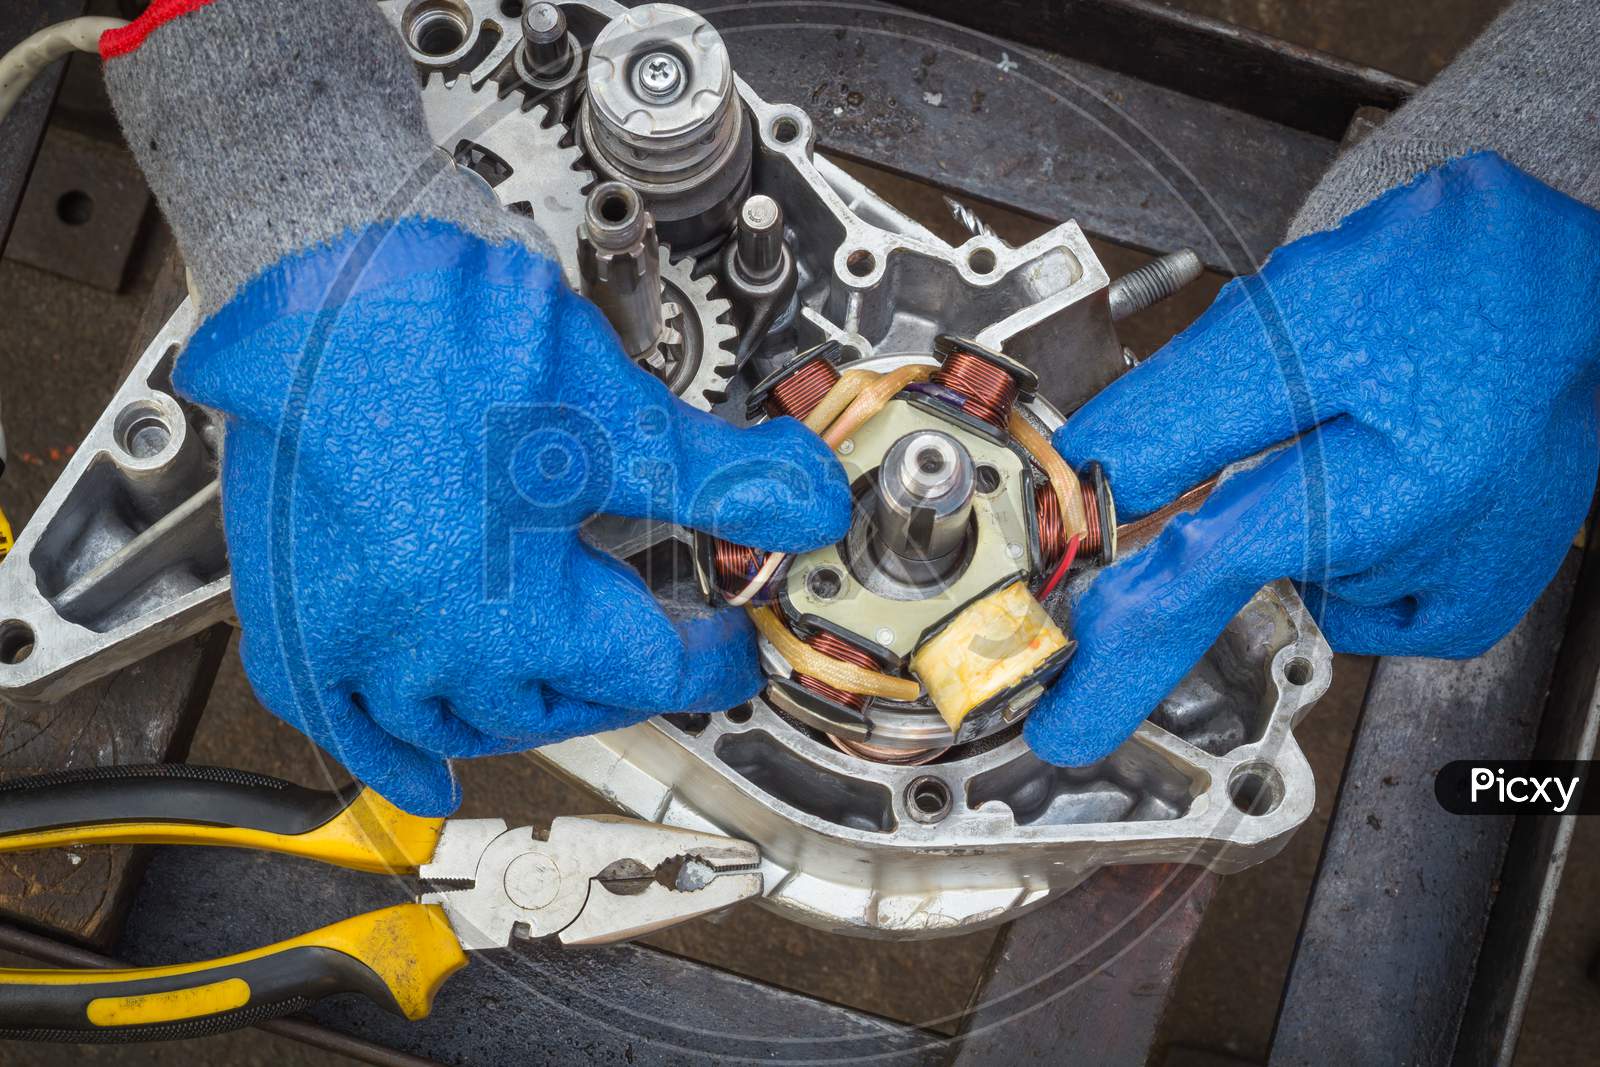 A Dexterous pair of hands is carefully assembling a Electrical stator coil plate inside a Motorcycle engine during an Overhauling procedure at Motorcycle workshop in Mysuru,India.